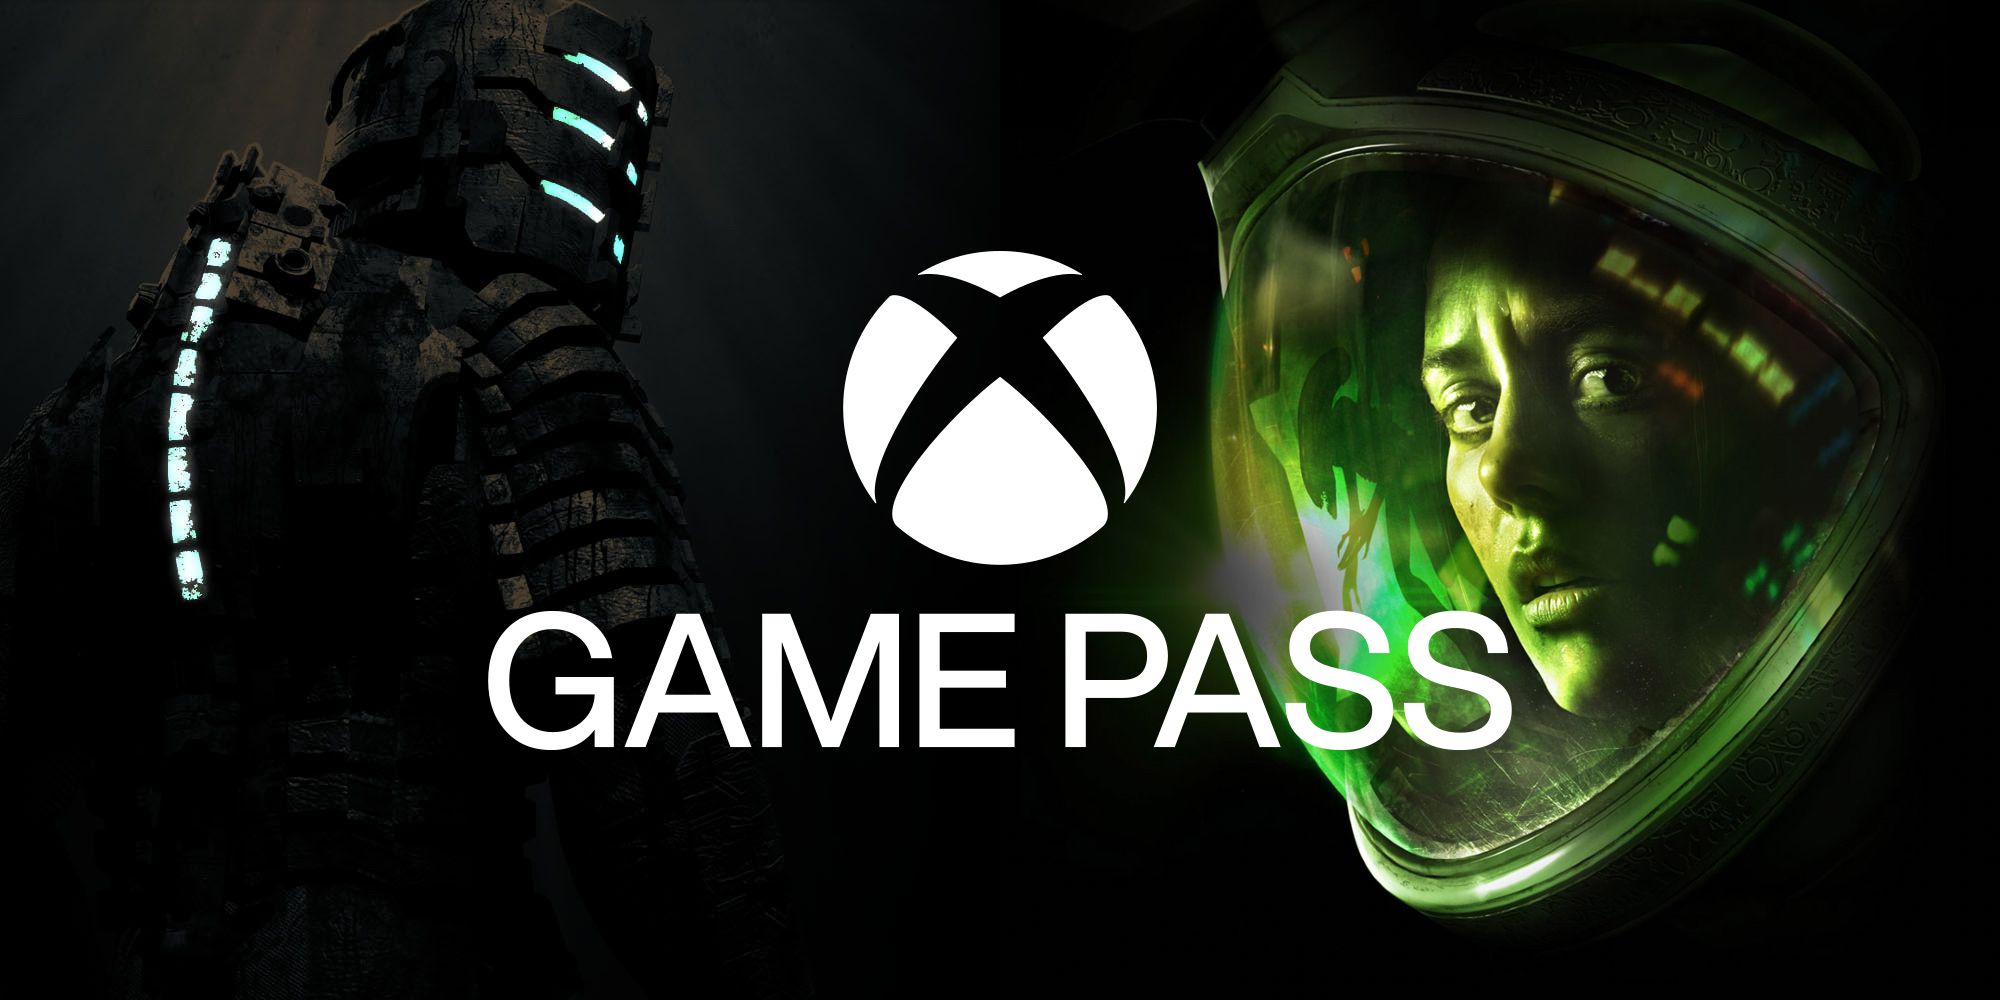 The Xbox Game Pass Logo over the main characters from Dead Space and Alien: Isolation.